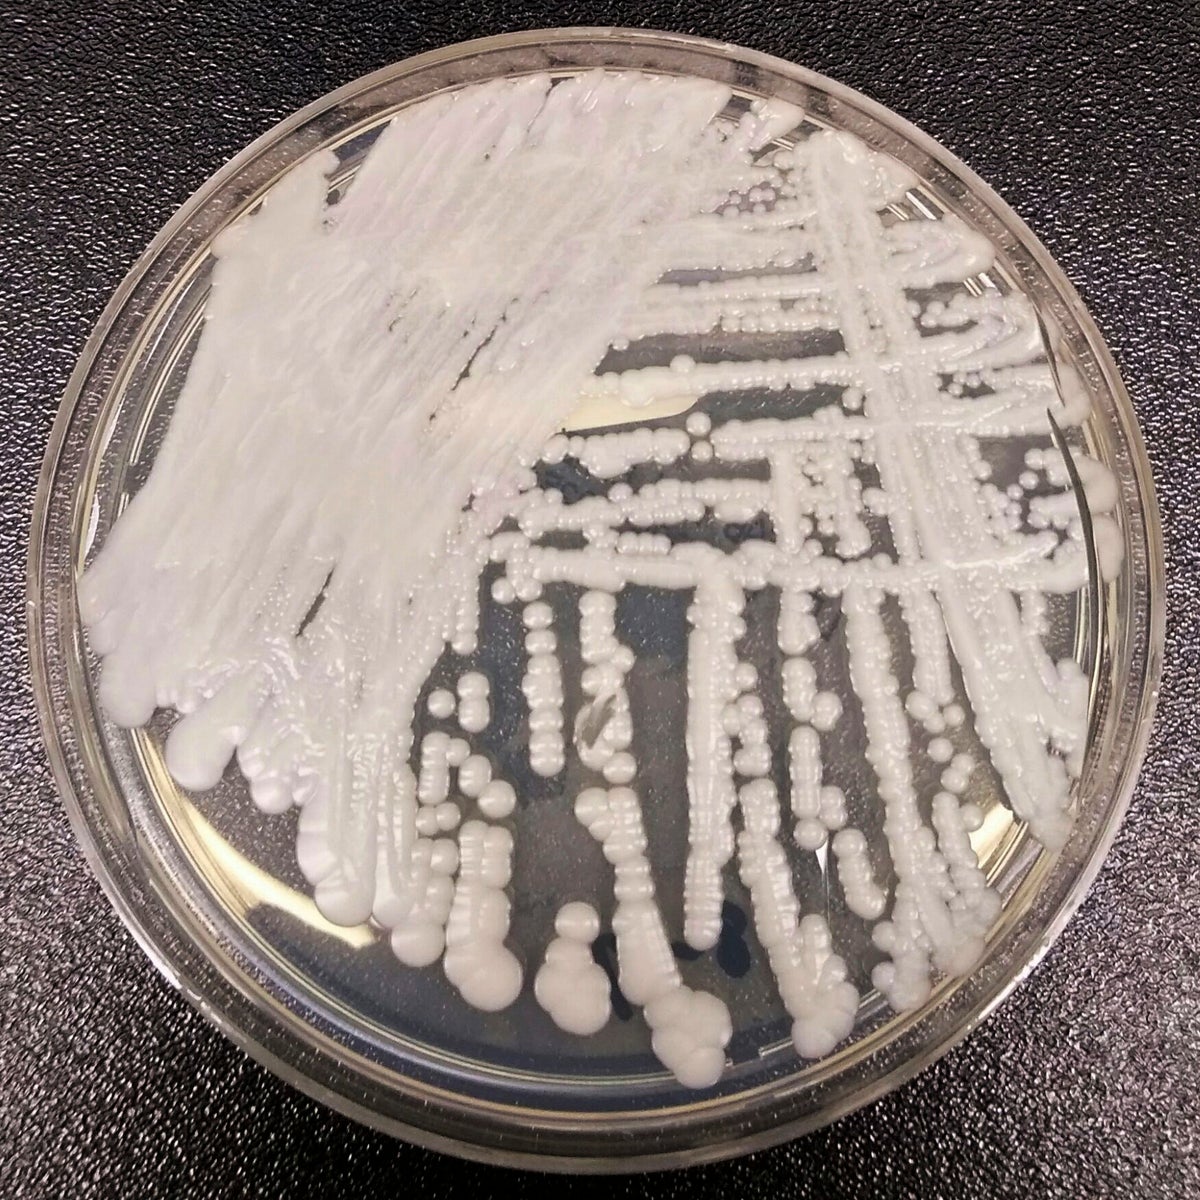 A CDC warning and a fungus spreading: Everything we know about the deadly candida auris